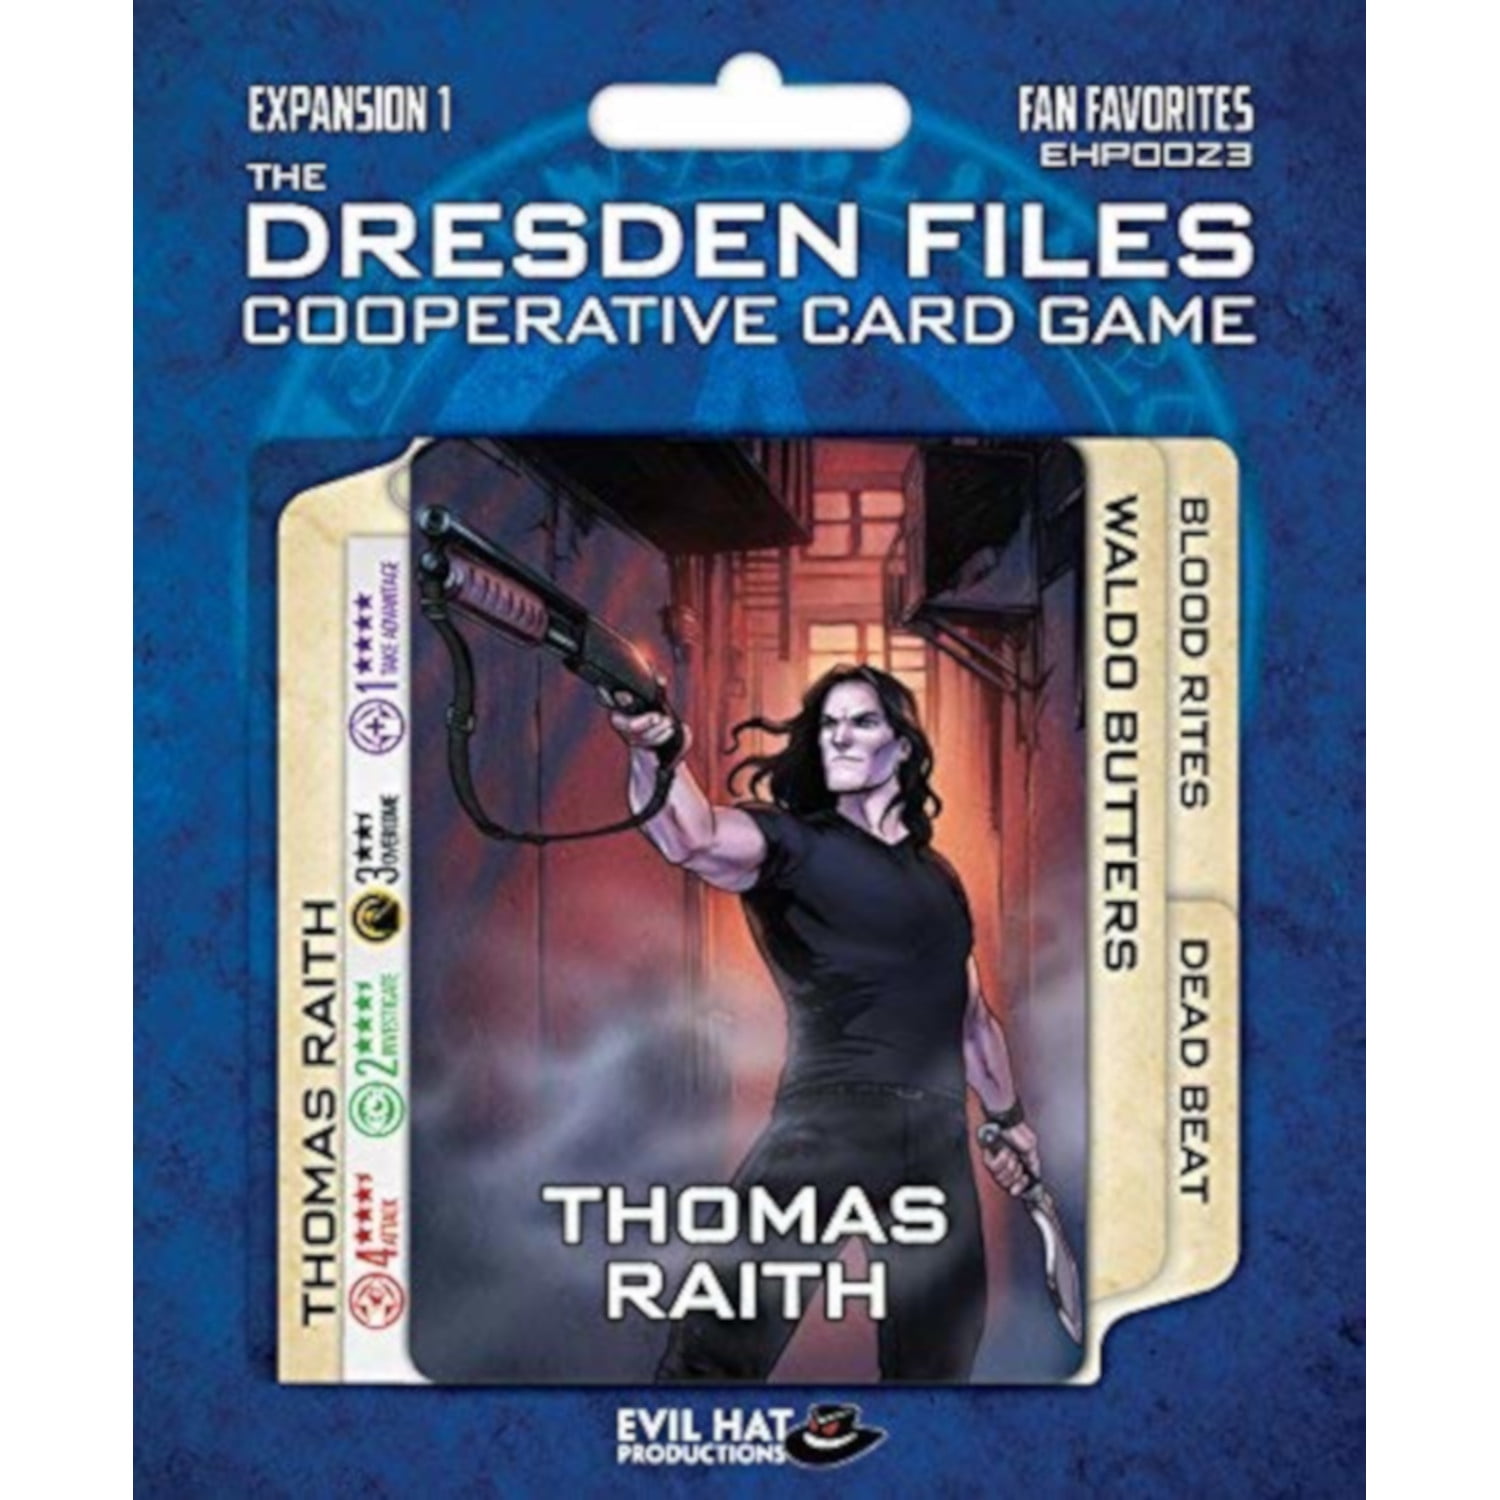 Ehp0023 Dresden Files Cooperative Card Game Expansion